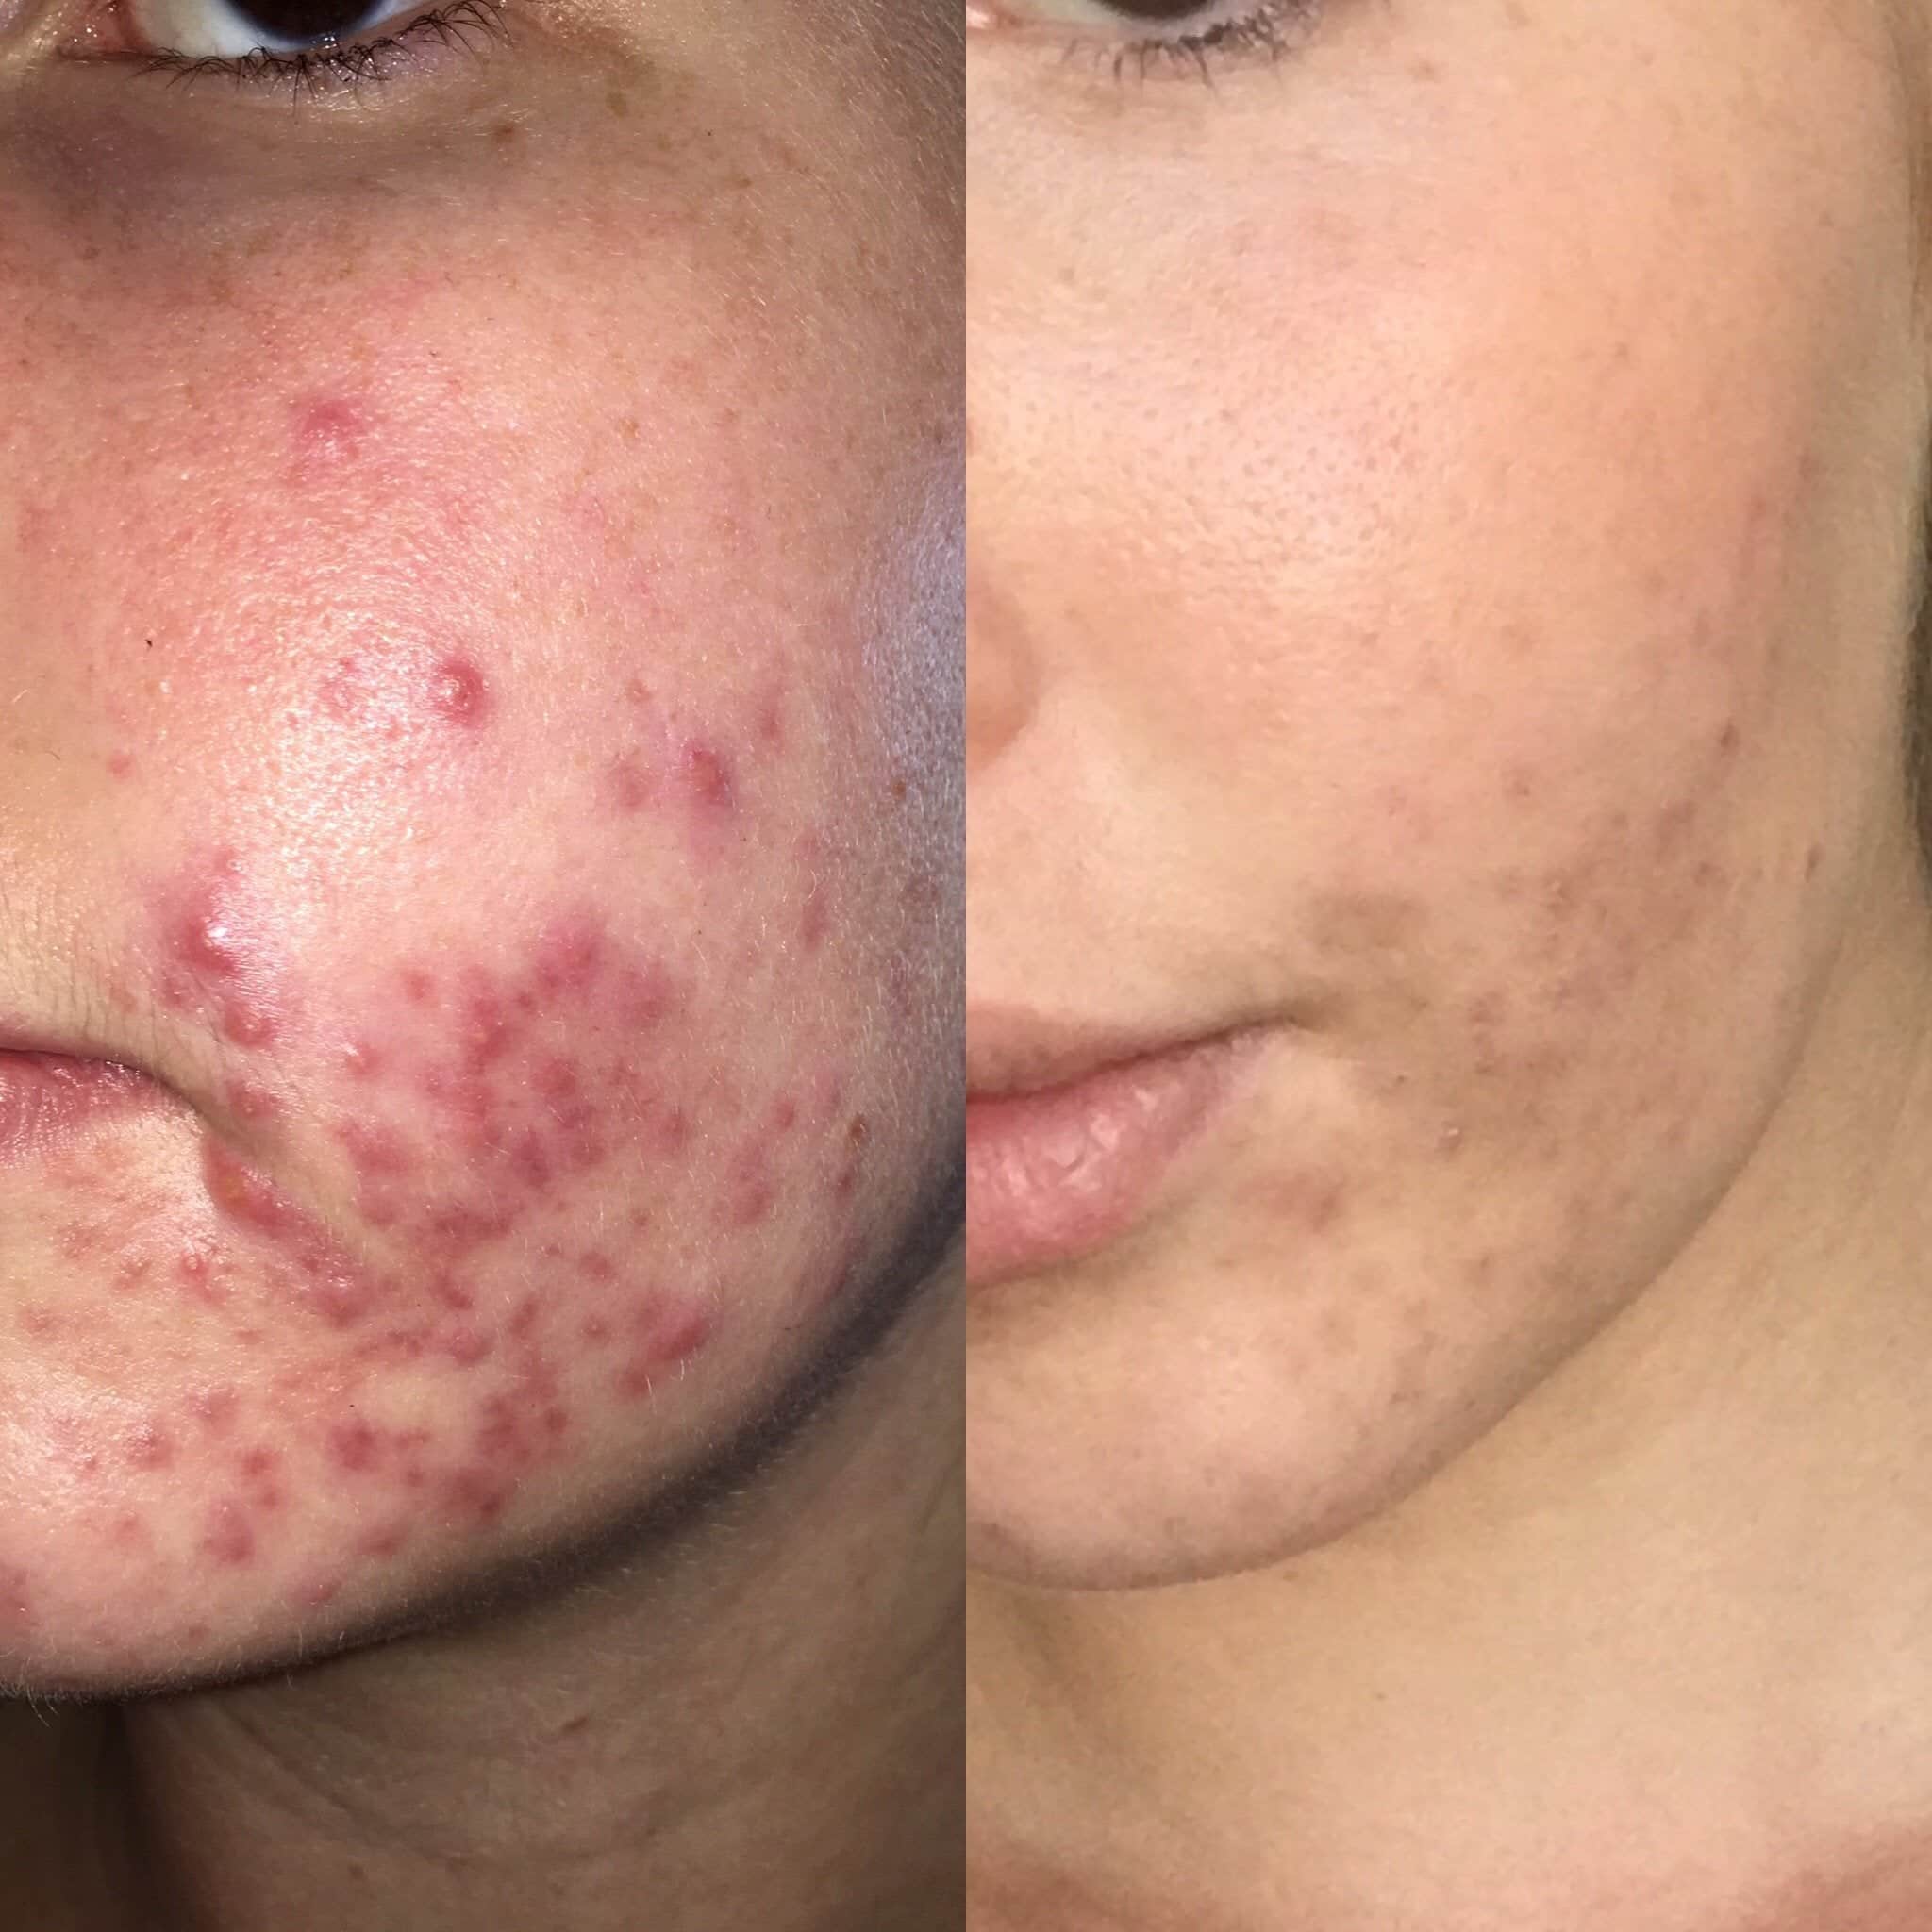 [Acne] Cystic and Hormonal Acne gone!! : SkincareAddiction